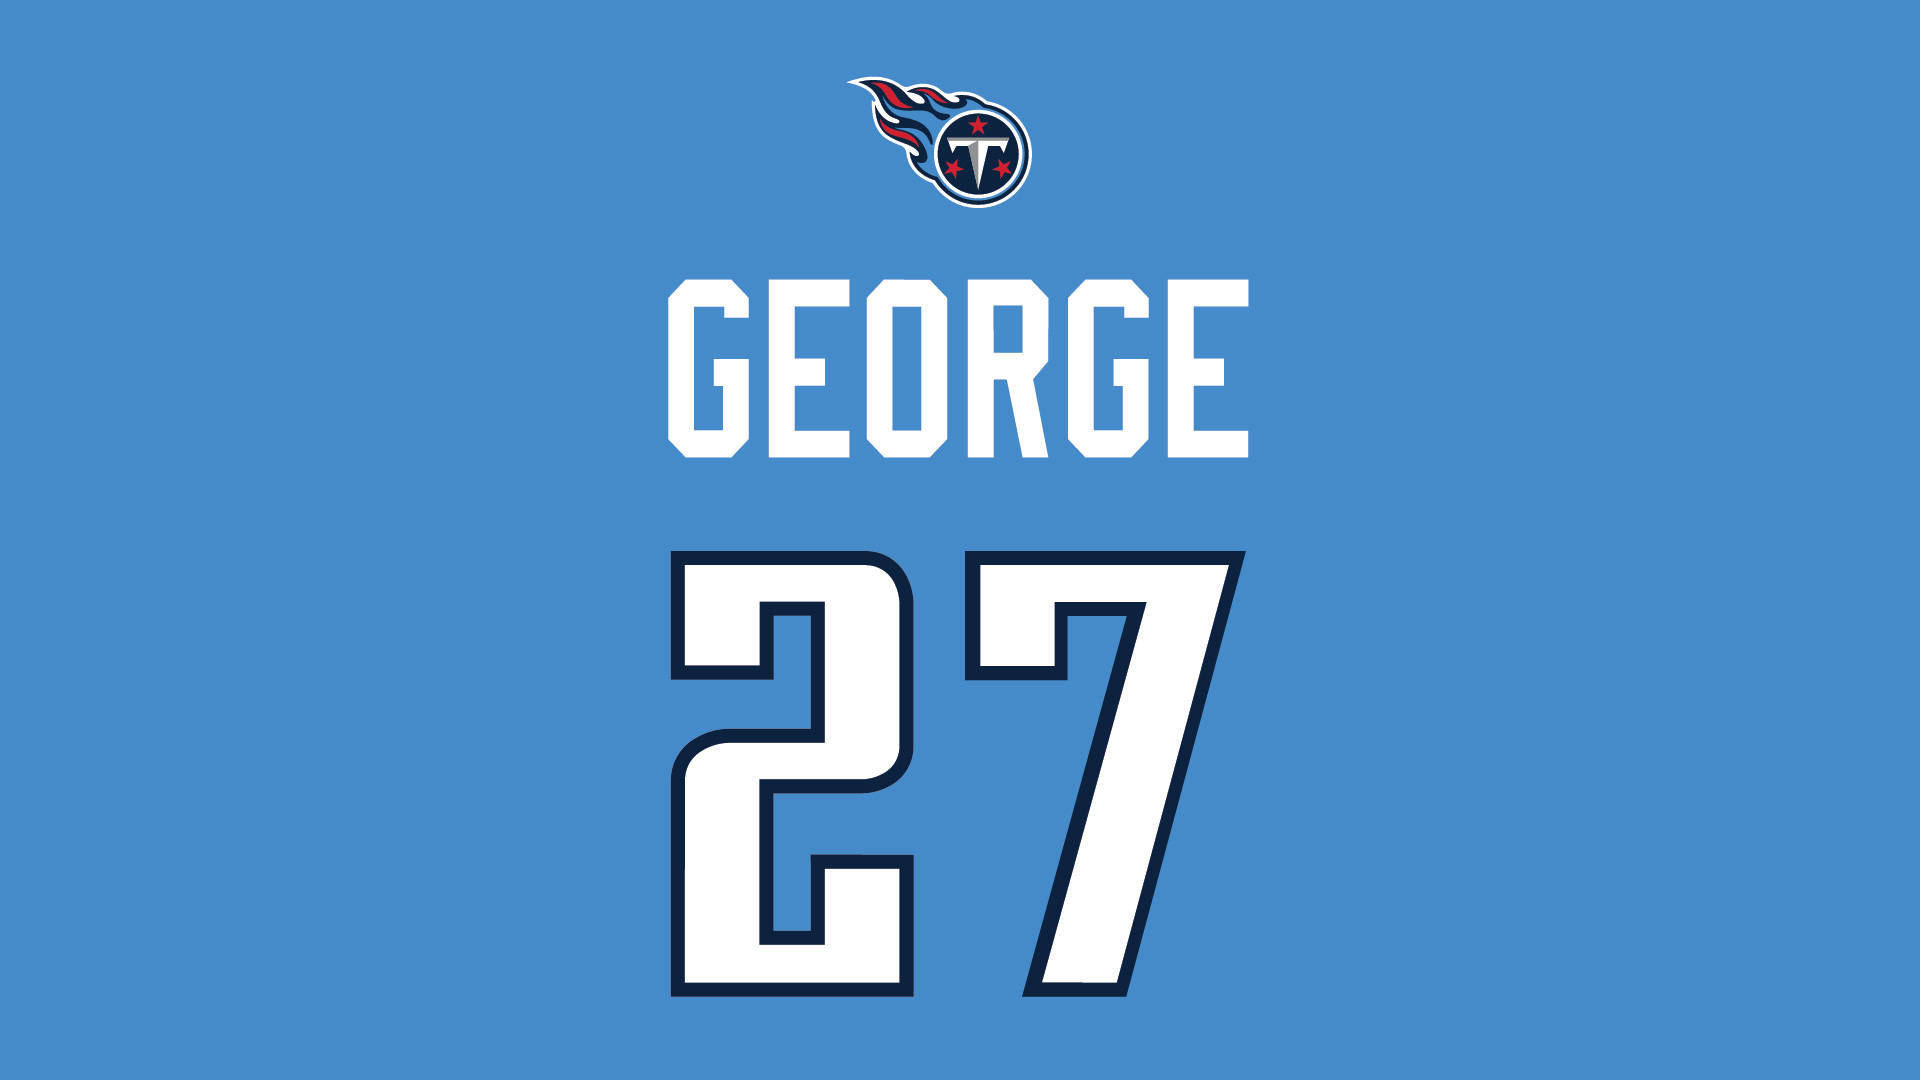 Tennessee Titans 27 Jersey Background